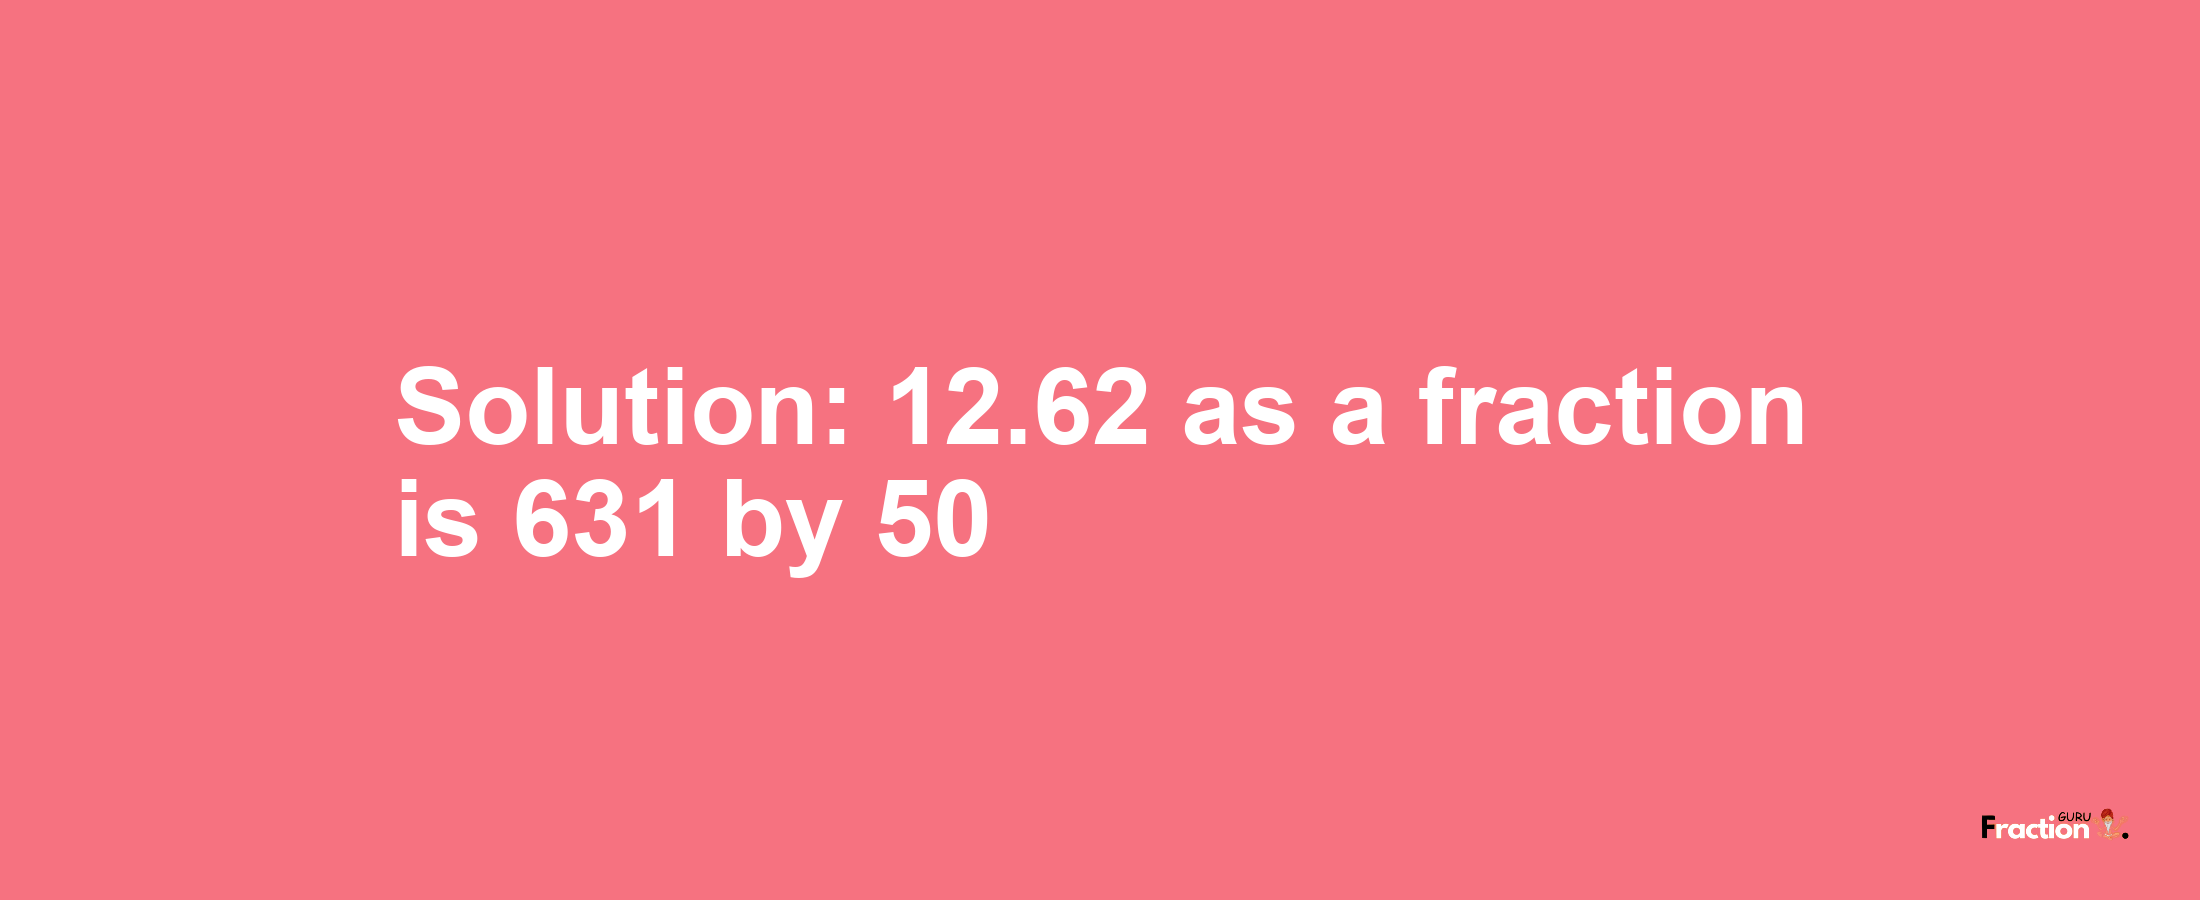 Solution:12.62 as a fraction is 631/50